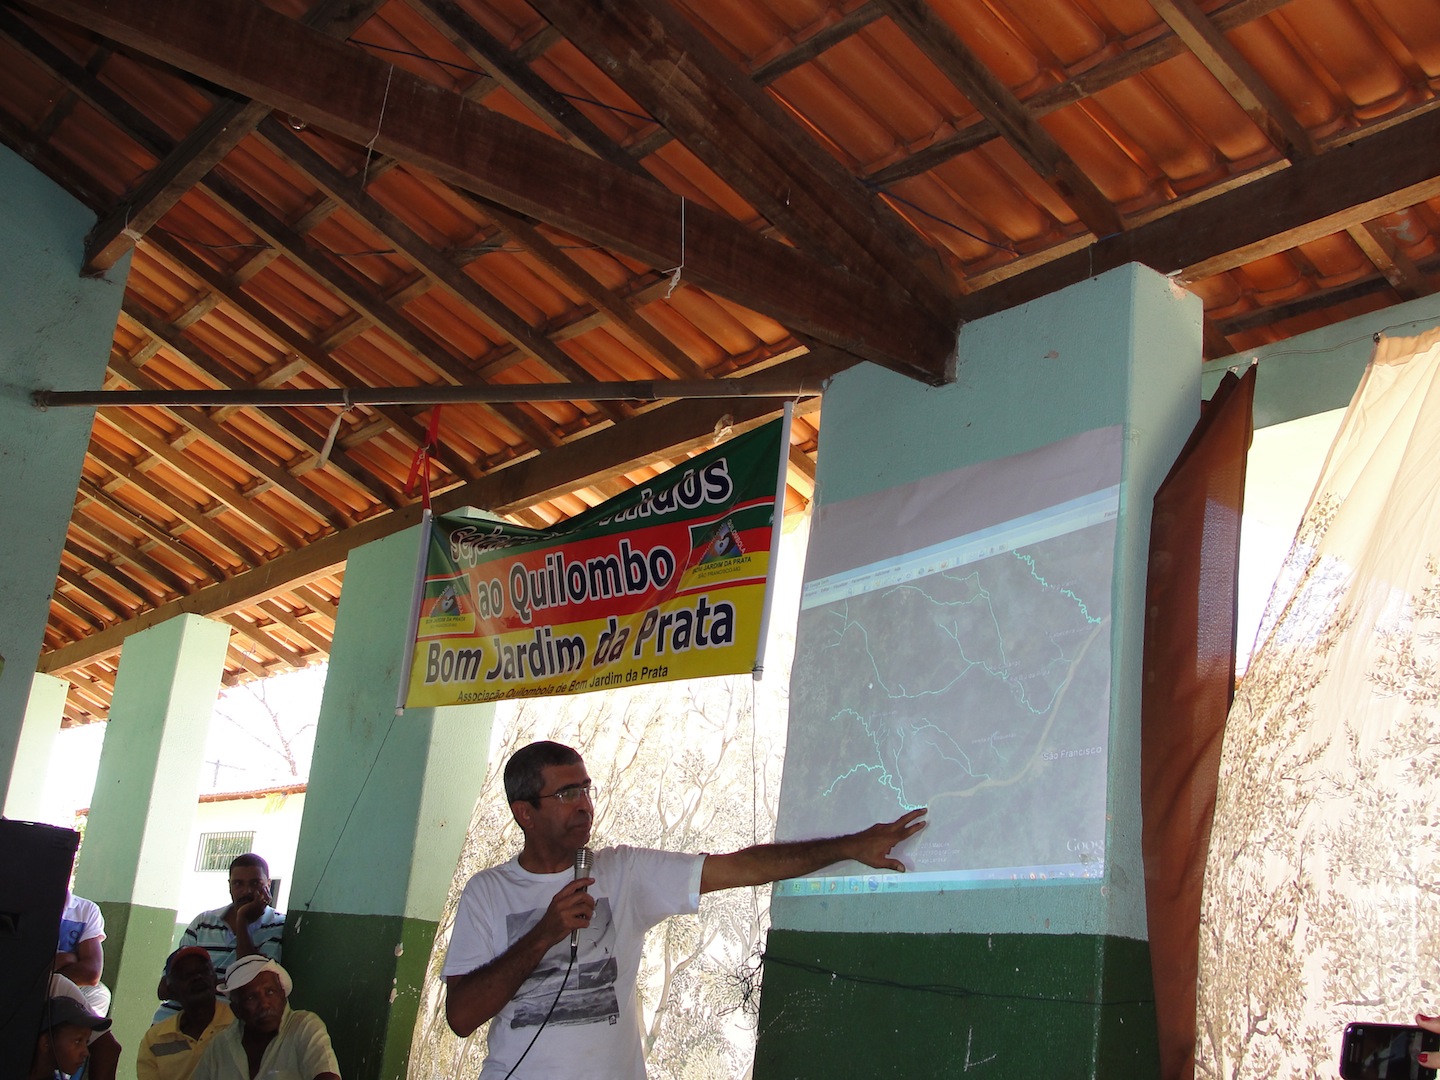 Meeting to approve geographical limits of Quilombo 2